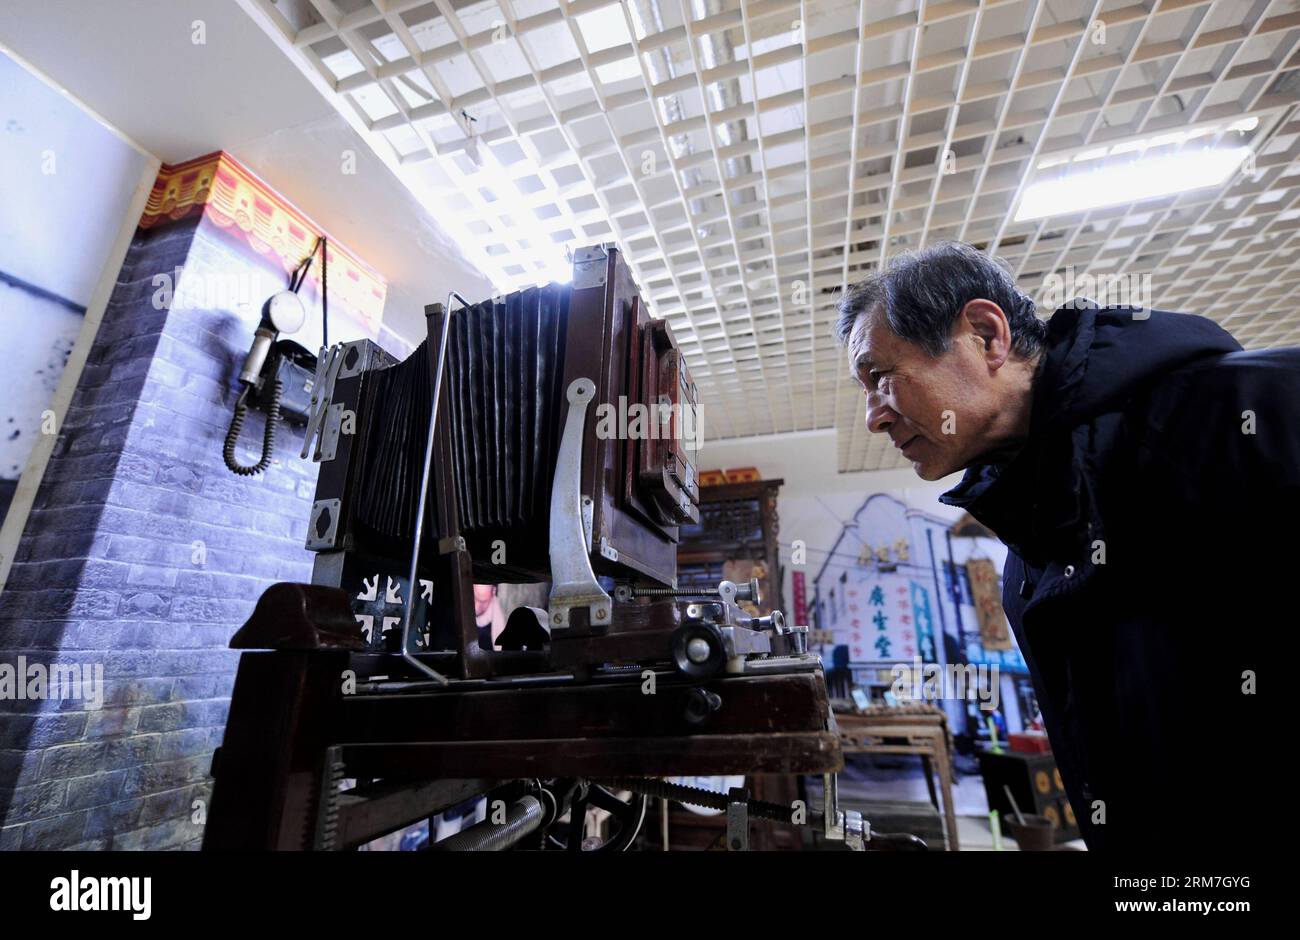 (140227) -- SHENYANG, Feb. 27, 2014 (Xinhua) -- A visitor views an old-fashioned camera at the City Memory Museum in Shenyang, capital of northeast China s Liaoning Province, Feb. 27, 2014. Shenyang s City Memory Museum opened to visitors for free recently. Nearly ten thousand exhibits are displayed at the museum to present the history and folk culture of Shenyang. (Xinhua/Zhang Wenkui) (zgp) CHINA-SHENYANG-CITY MEMORY MUSEUM (CN) PUBLICATIONxNOTxINxCHN   Shenyang Feb 27 2014 XINHUA a Visitor Views to Old fashioned Camera AT The City Memory Museum in Shenyang Capital of Northeast China S Liaon Stock Photo